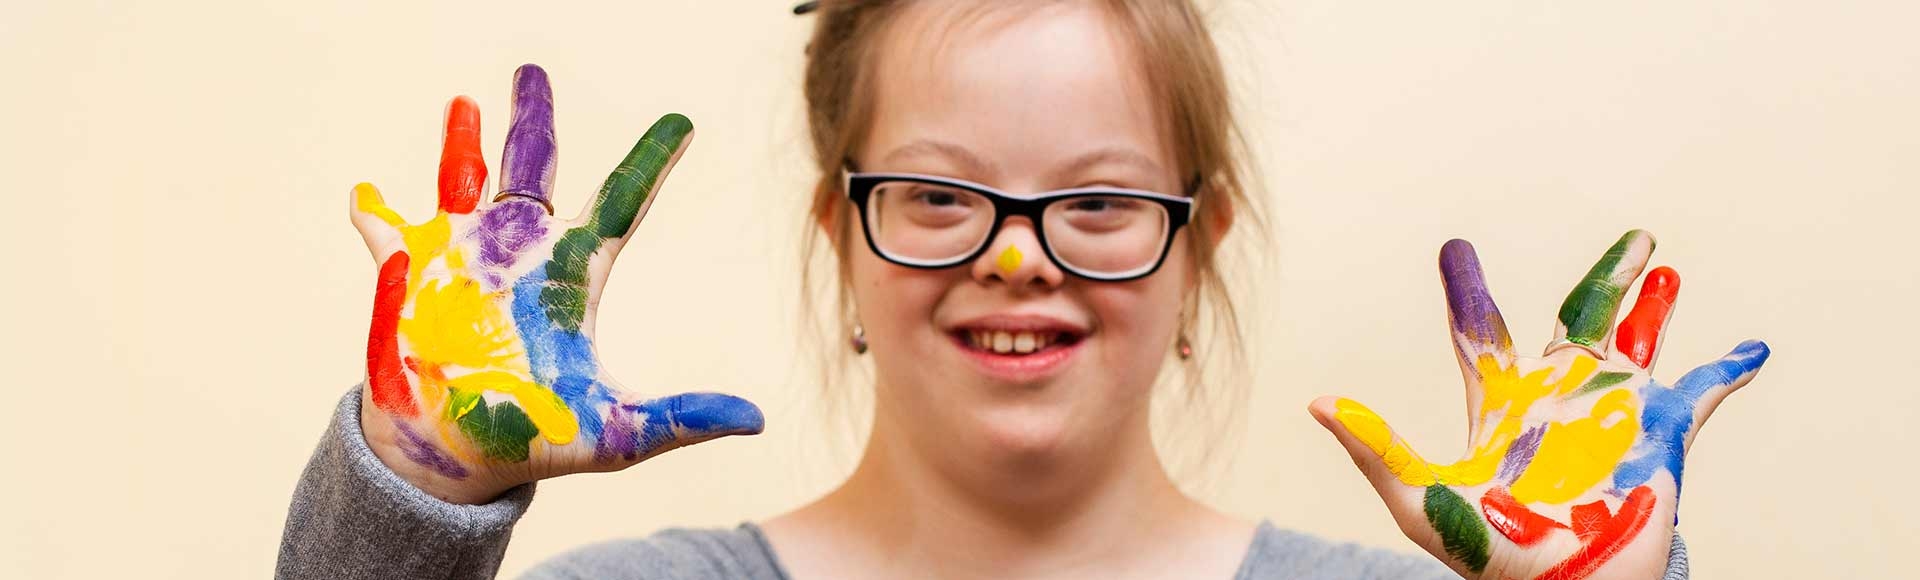 girl with down syndrome showing off her colorful palms